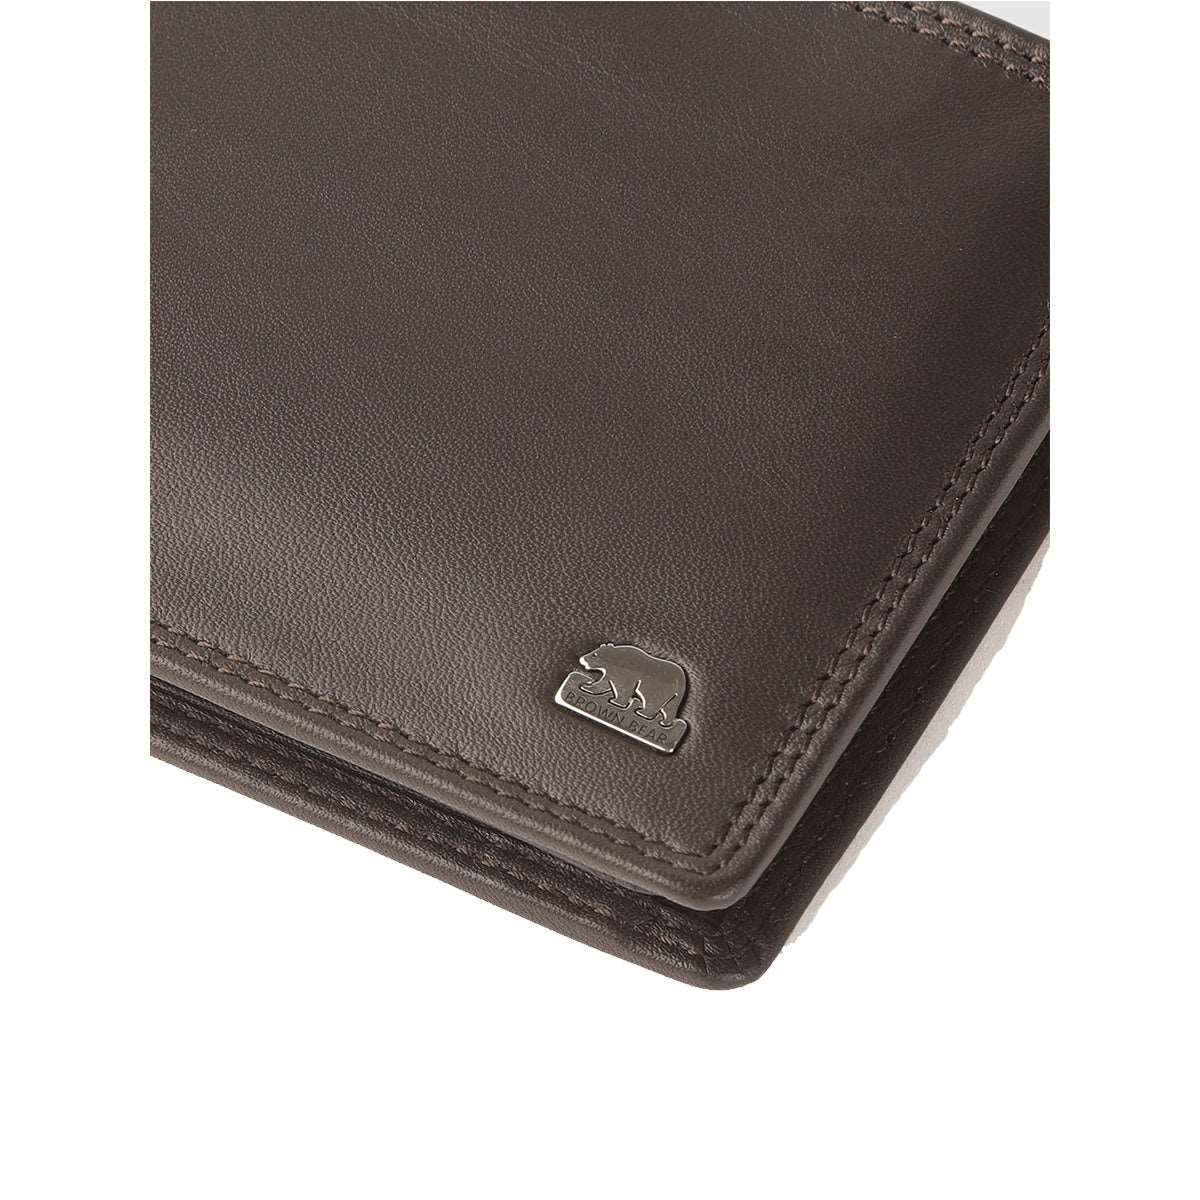 pocket bazar Men Tan Genuine Leather Wallet (8 Card Slots) : Amazon.in:  Bags, Wallets and Luggage